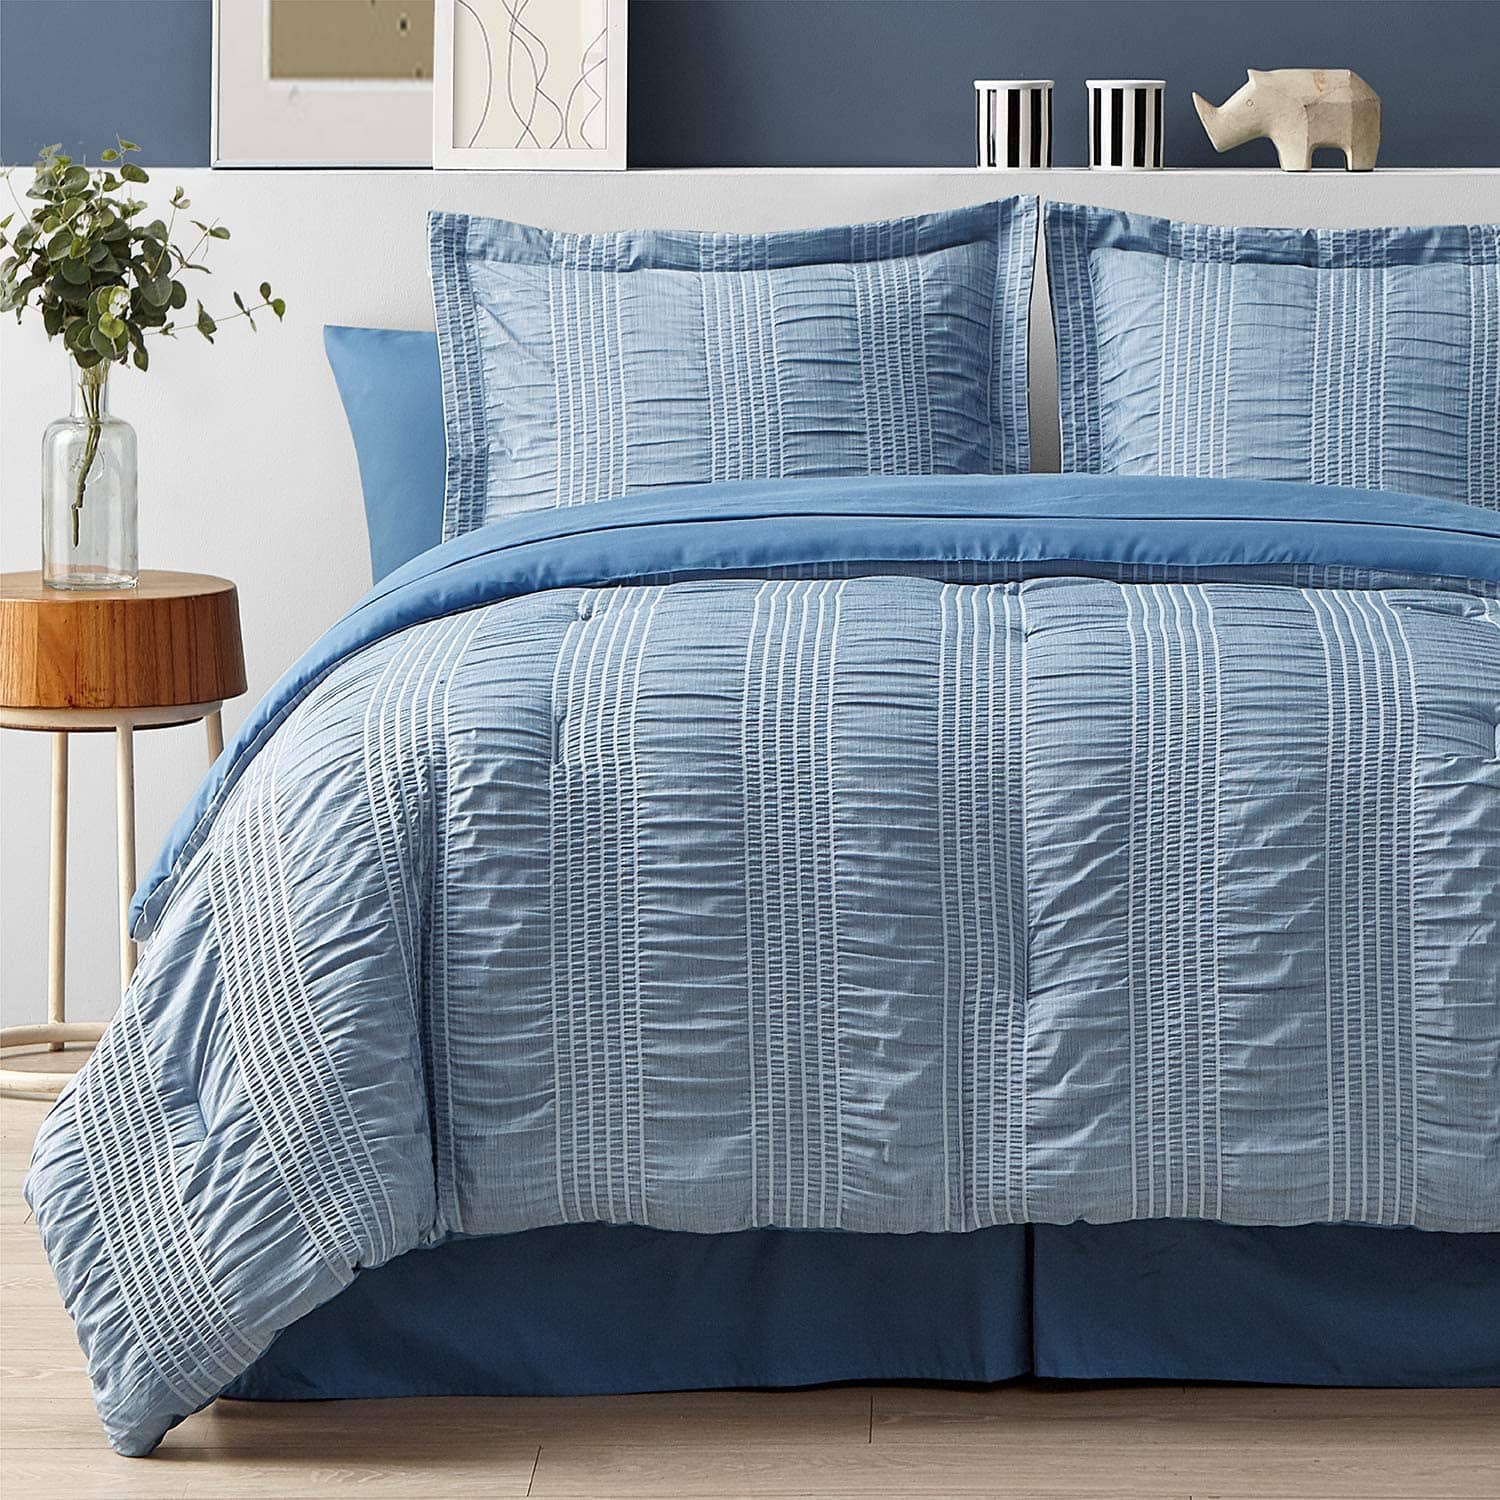 Bedsure Comforter Set 5/7 Pieces - Striped Beddding Sets, Bed in a